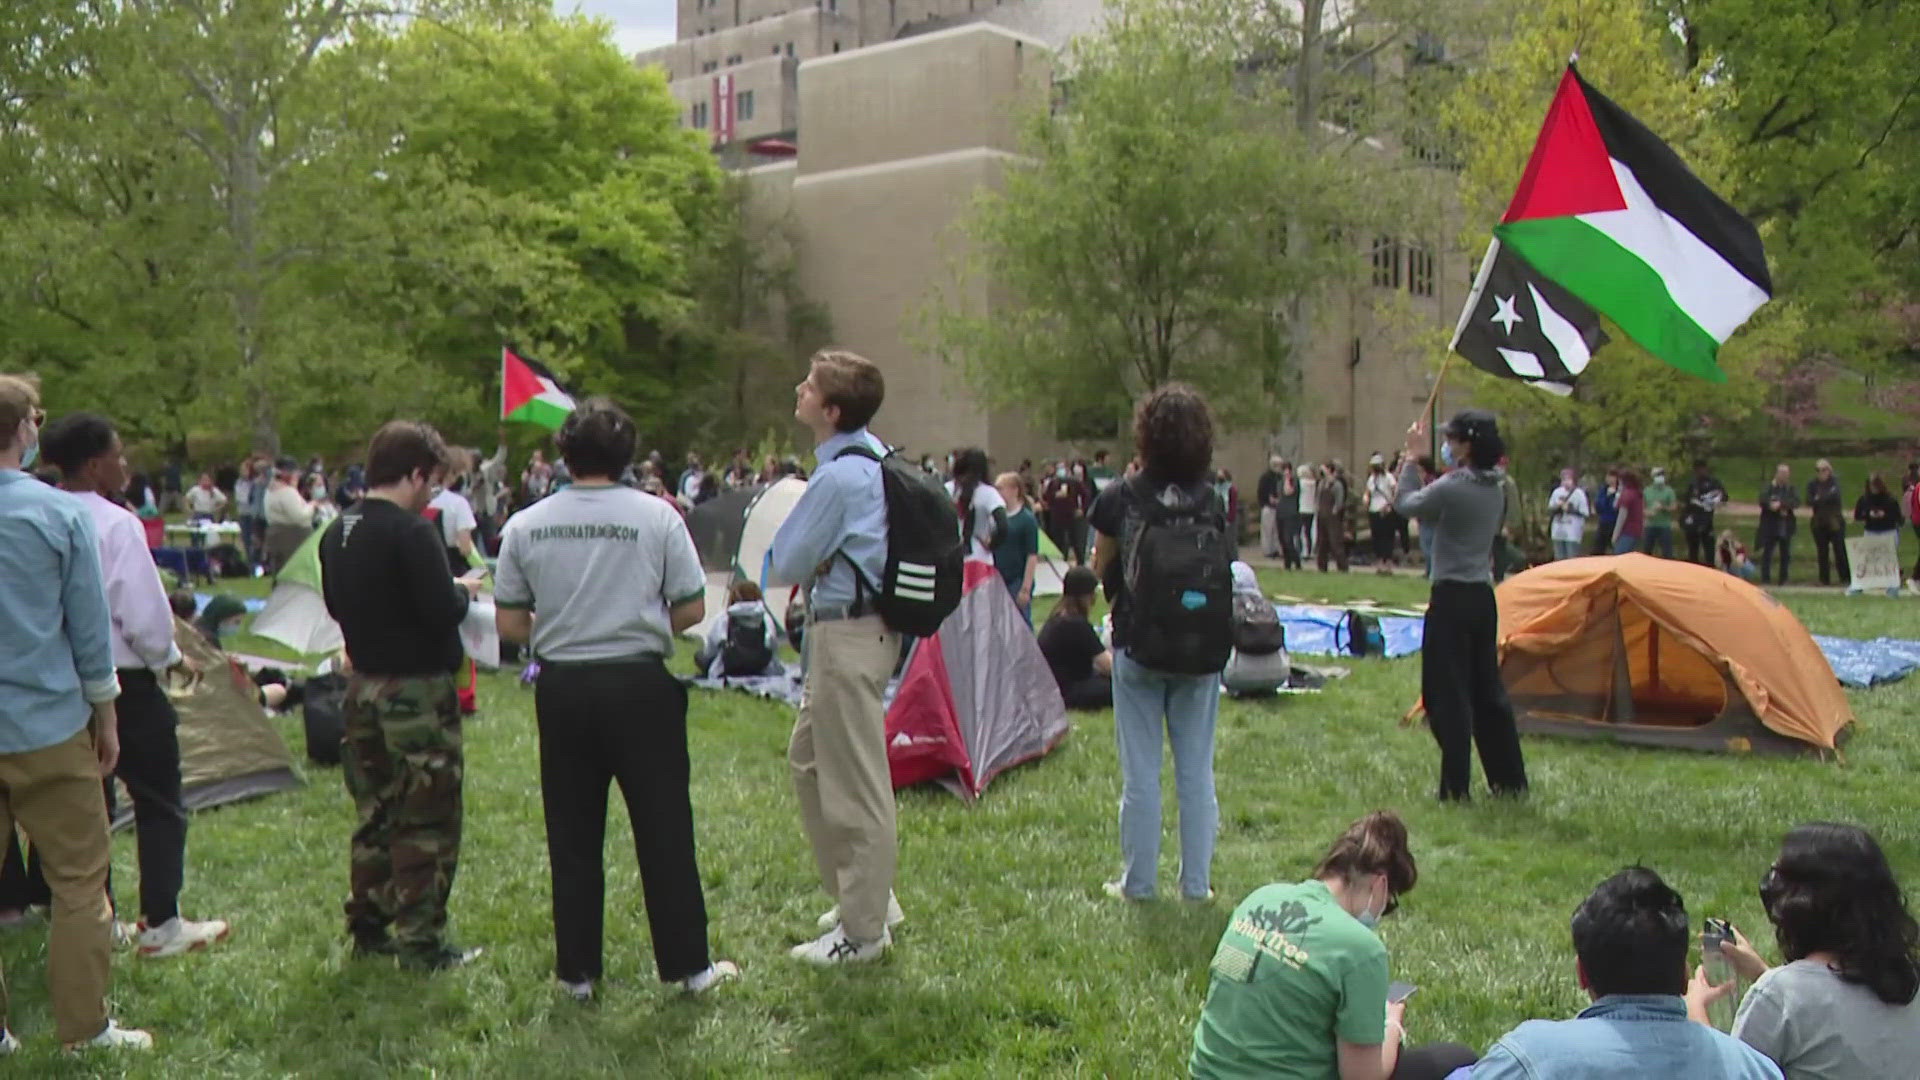 Protesters are calling on IU to cut ties with any lobbying groups or companies that are connected to Israel and the war.